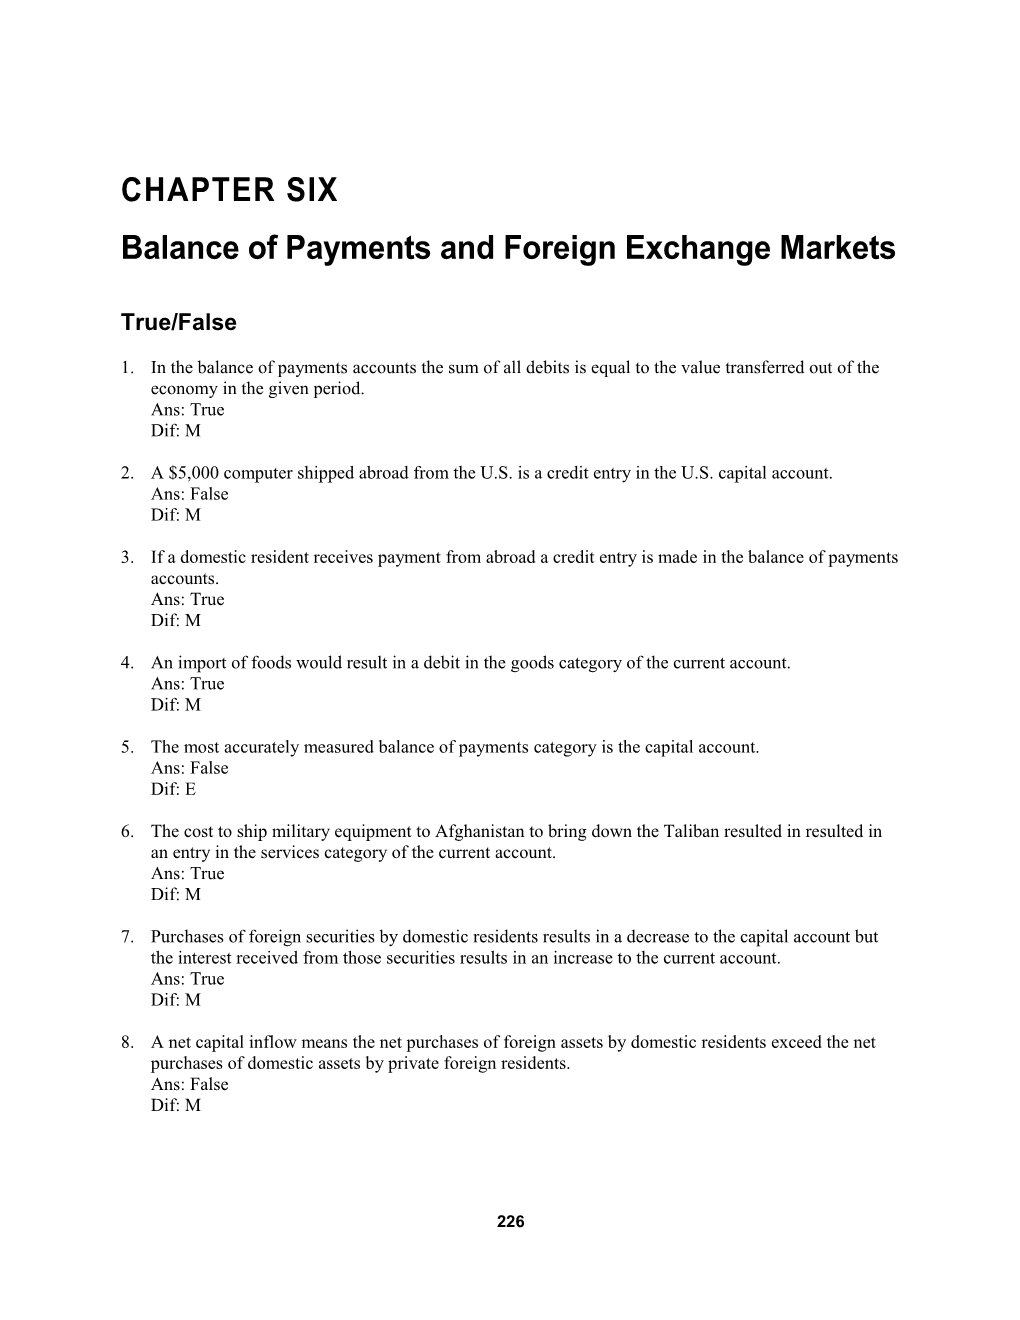 Balance of Payments and Foreign Exchange Markets1